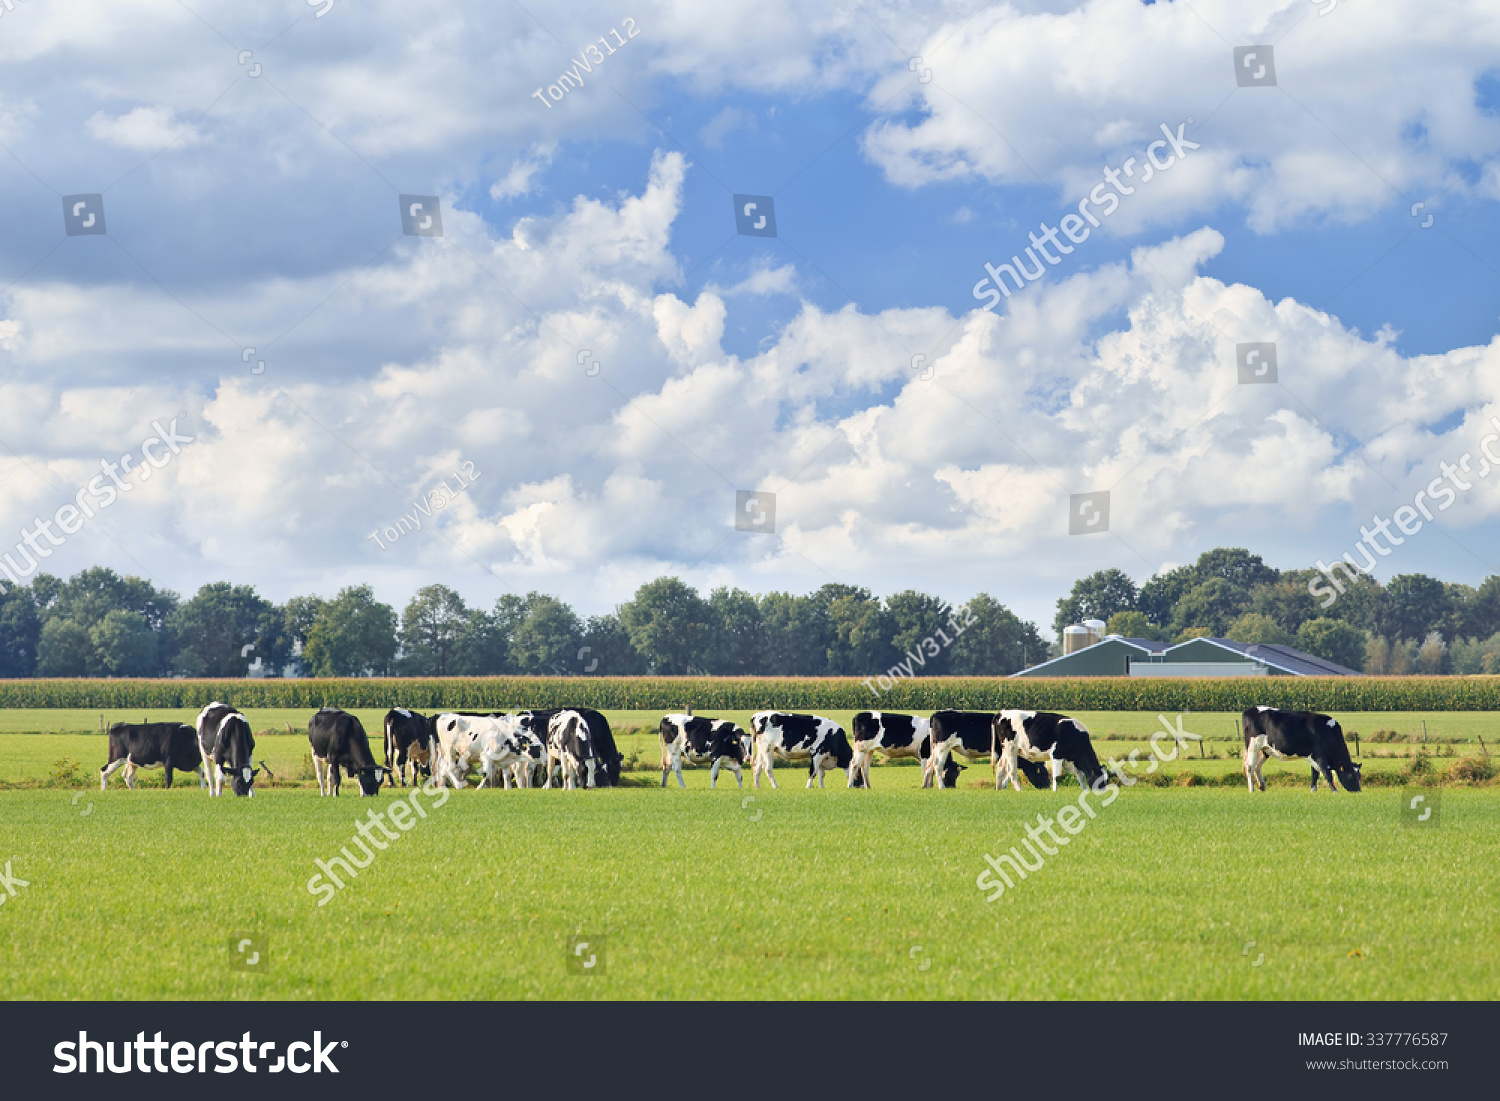 Holstein-Friesian cattle in a green meadow, cornfield and farm on background, blue sky and dramatic cloud, The Netherlands. #337776587